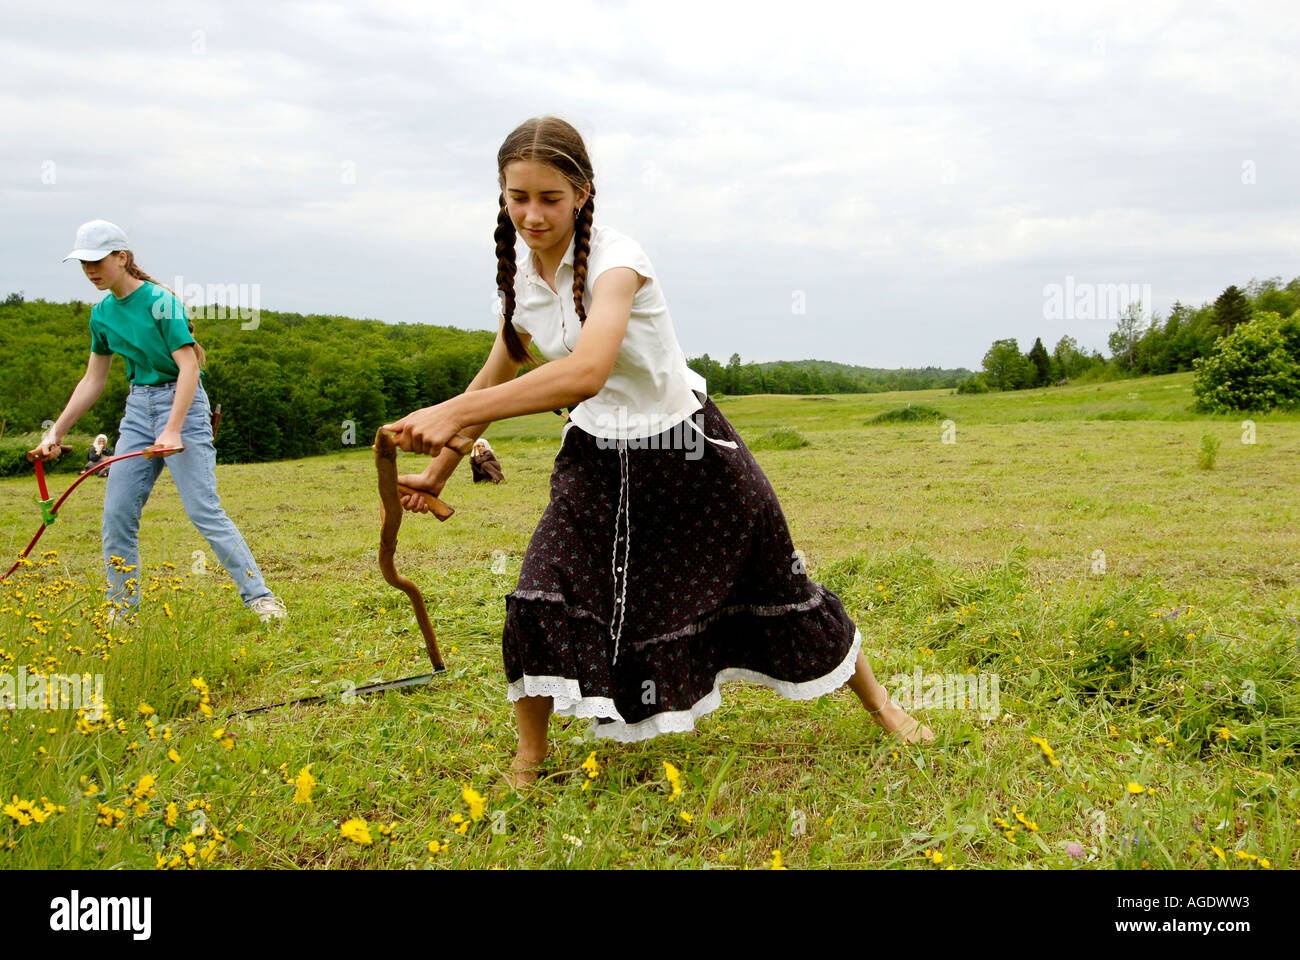 Stock image of a young farm girl in skirt and long braids scything or hand mowing a hay field Stock Photo